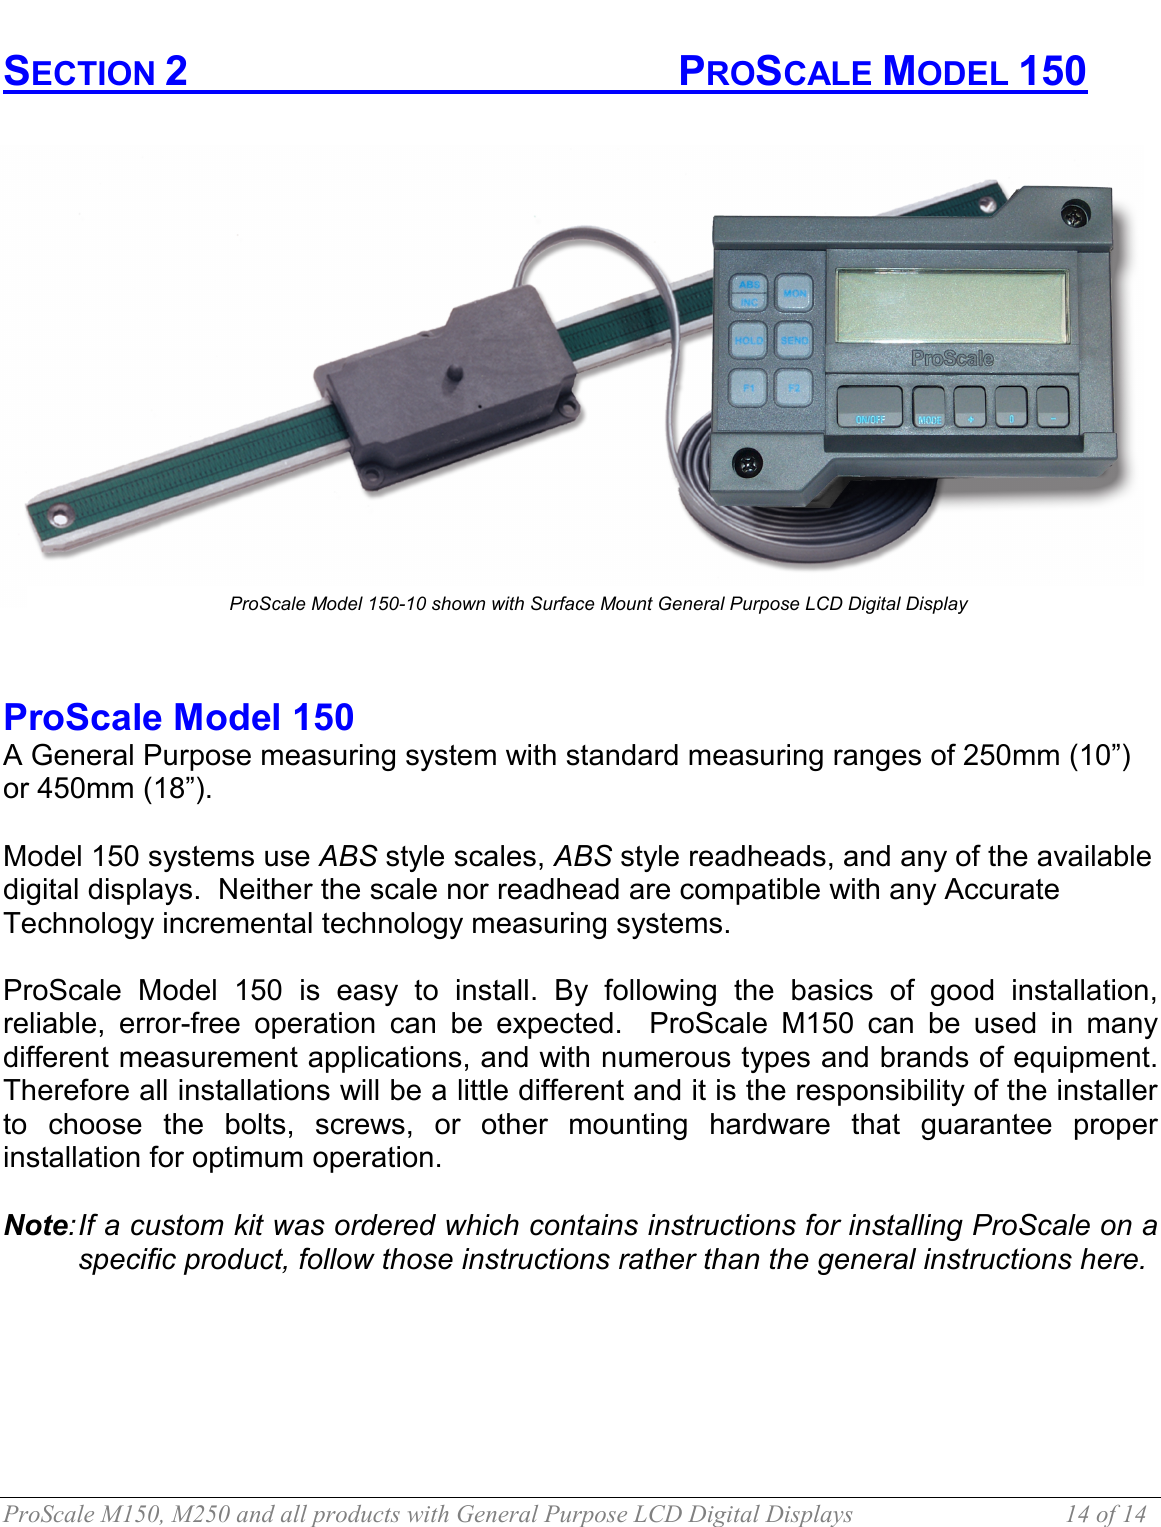  ProScale M150, M250 and all products with General Purpose LCD Digital Displays  14 of 14 SECTION 2       PROSCALE MODEL 150                        ProScale Model 150  A General Purpose measuring system with standard measuring ranges of 250mm (10”) or 450mm (18”).   Model 150 systems use ABS style scales, ABS style readheads, and any of the available digital displays.  Neither the scale nor readhead are compatible with any Accurate Technology incremental technology measuring systems.  ProScale Model 150 is easy to install. By following the basics of good installation, reliable, error-free operation can be expected.  ProScale M150 can be used in many different measurement applications, and with numerous types and brands of equipment. Therefore all installations will be a little different and it is the responsibility of the installer to choose the bolts, screws, or other mounting hardware that guarantee proper installation for optimum operation.  Note: If a custom kit was ordered which contains instructions for installing ProScale on a specific product, follow those instructions rather than the general instructions here.    ProScale Model 150-10 shown with Surface Mount General Purpose LCD Digital Display 